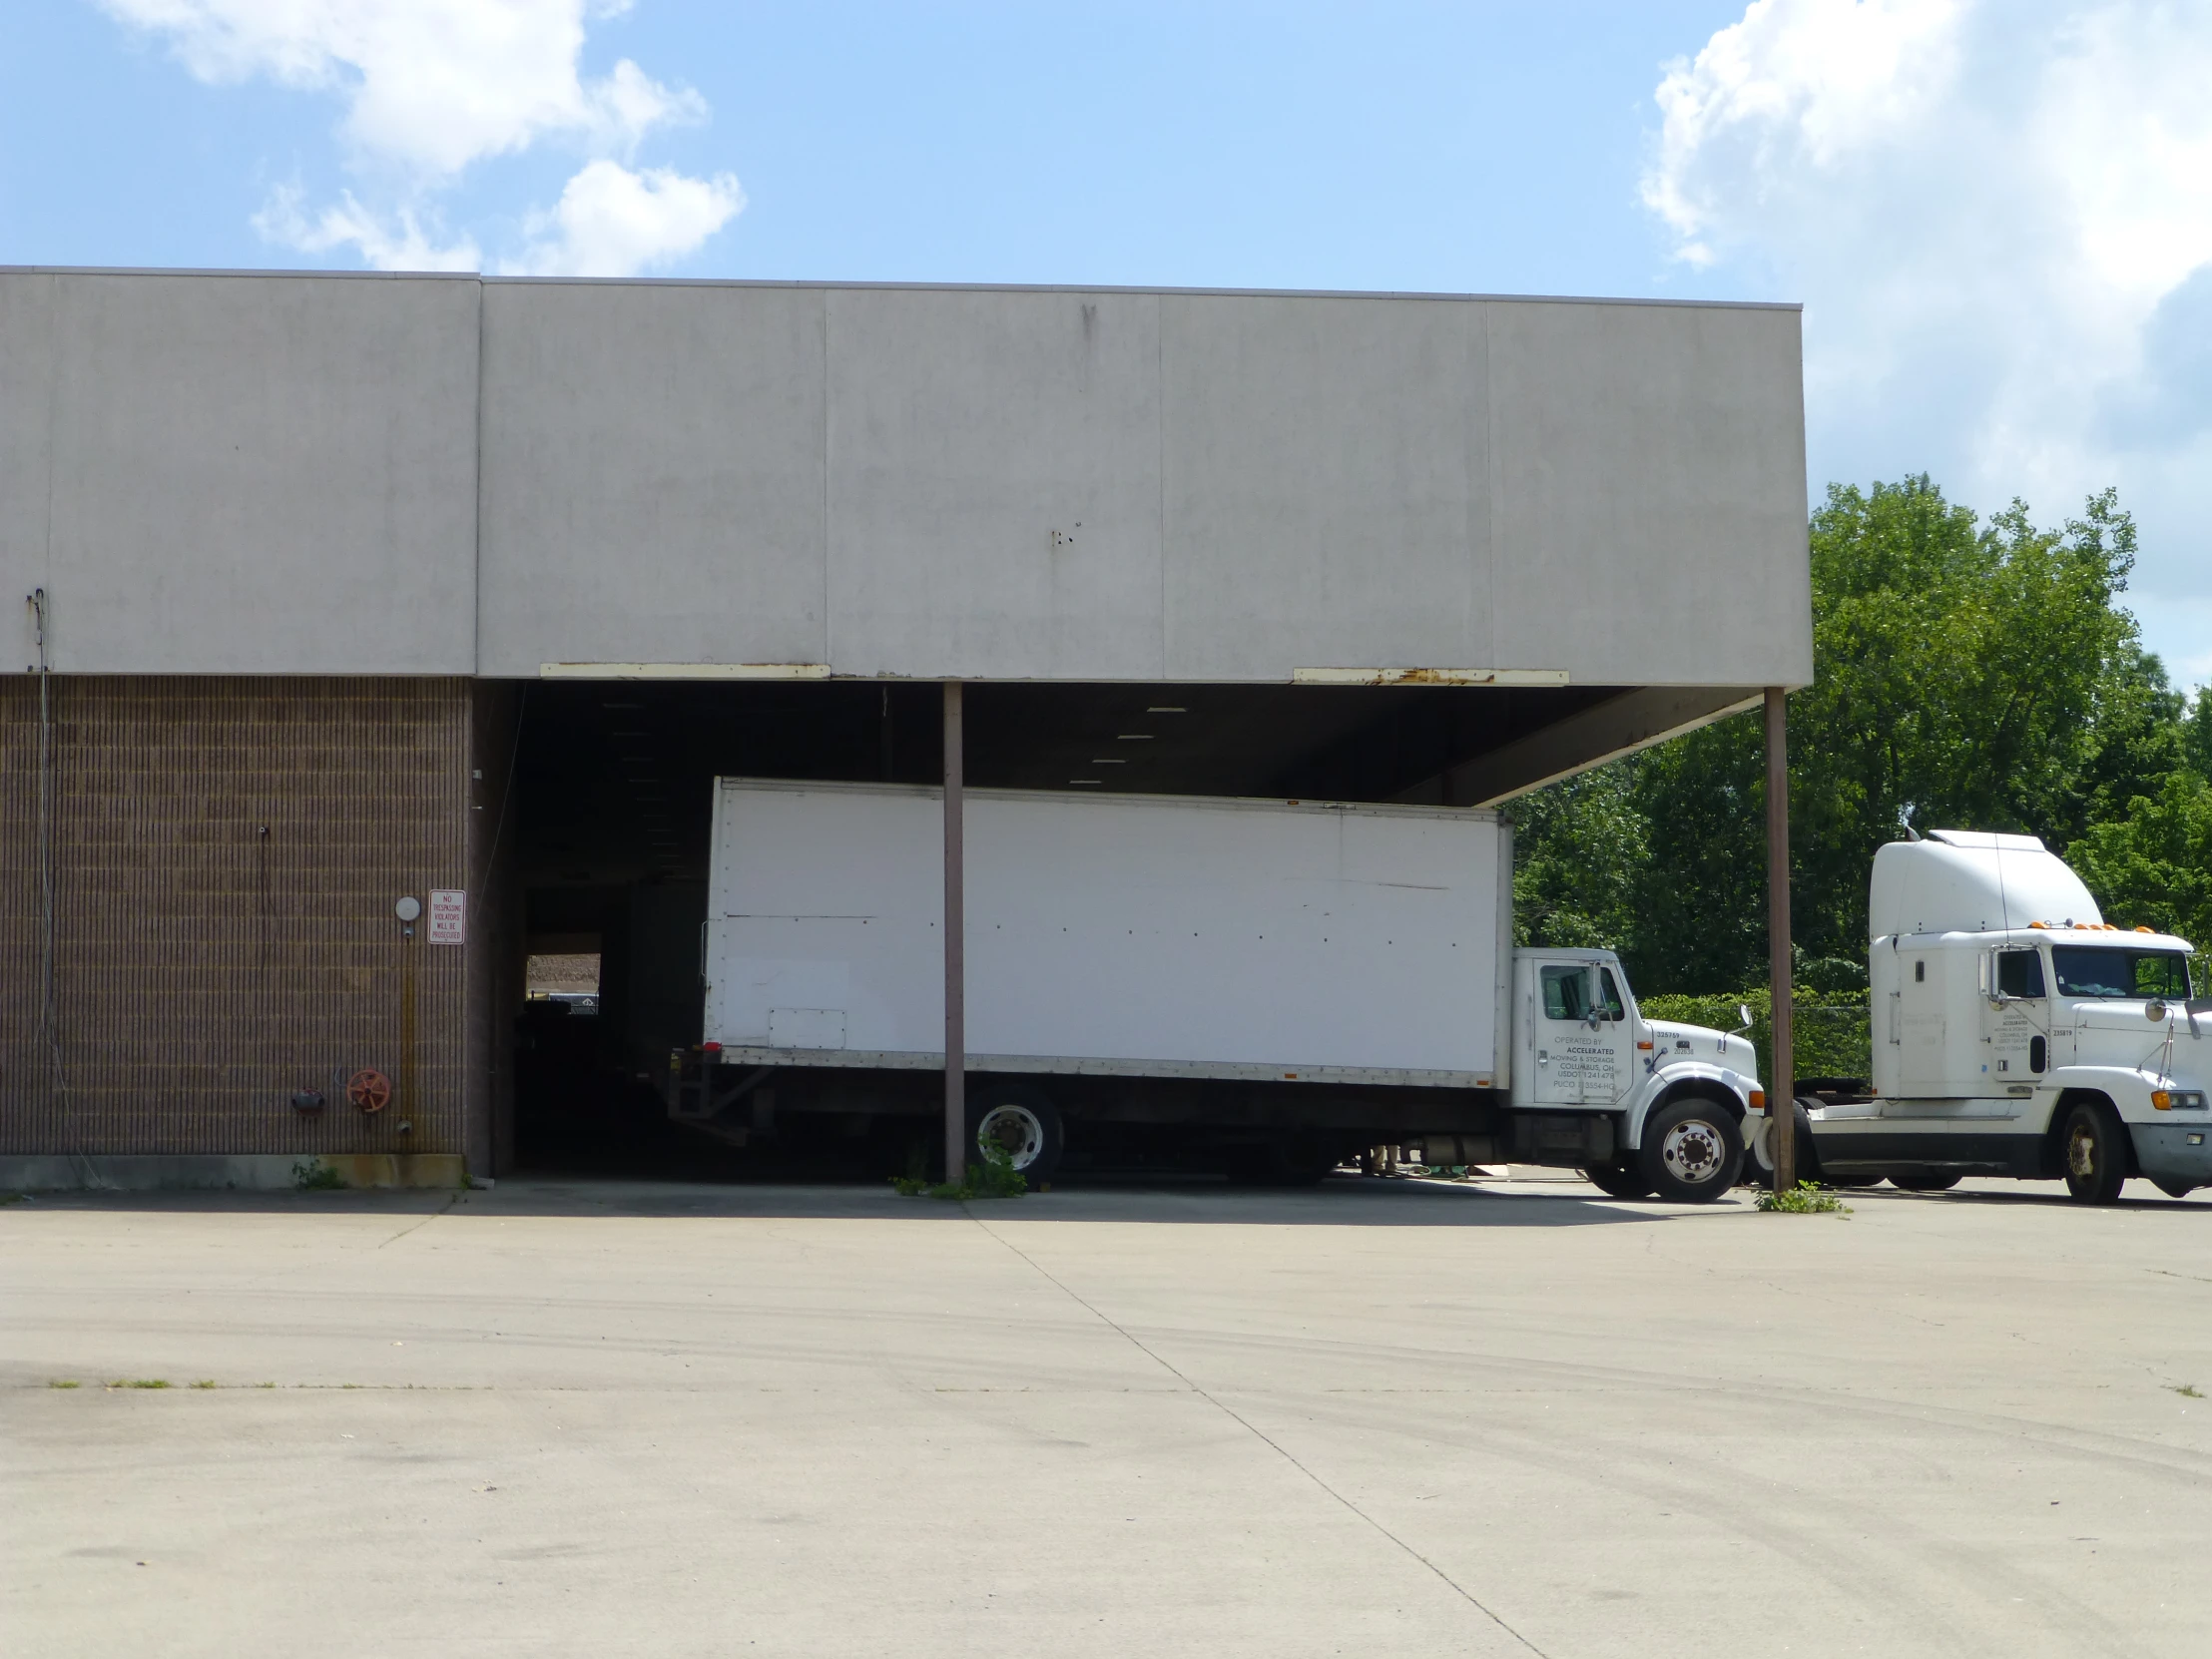 a large white truck parked in front of a cement building